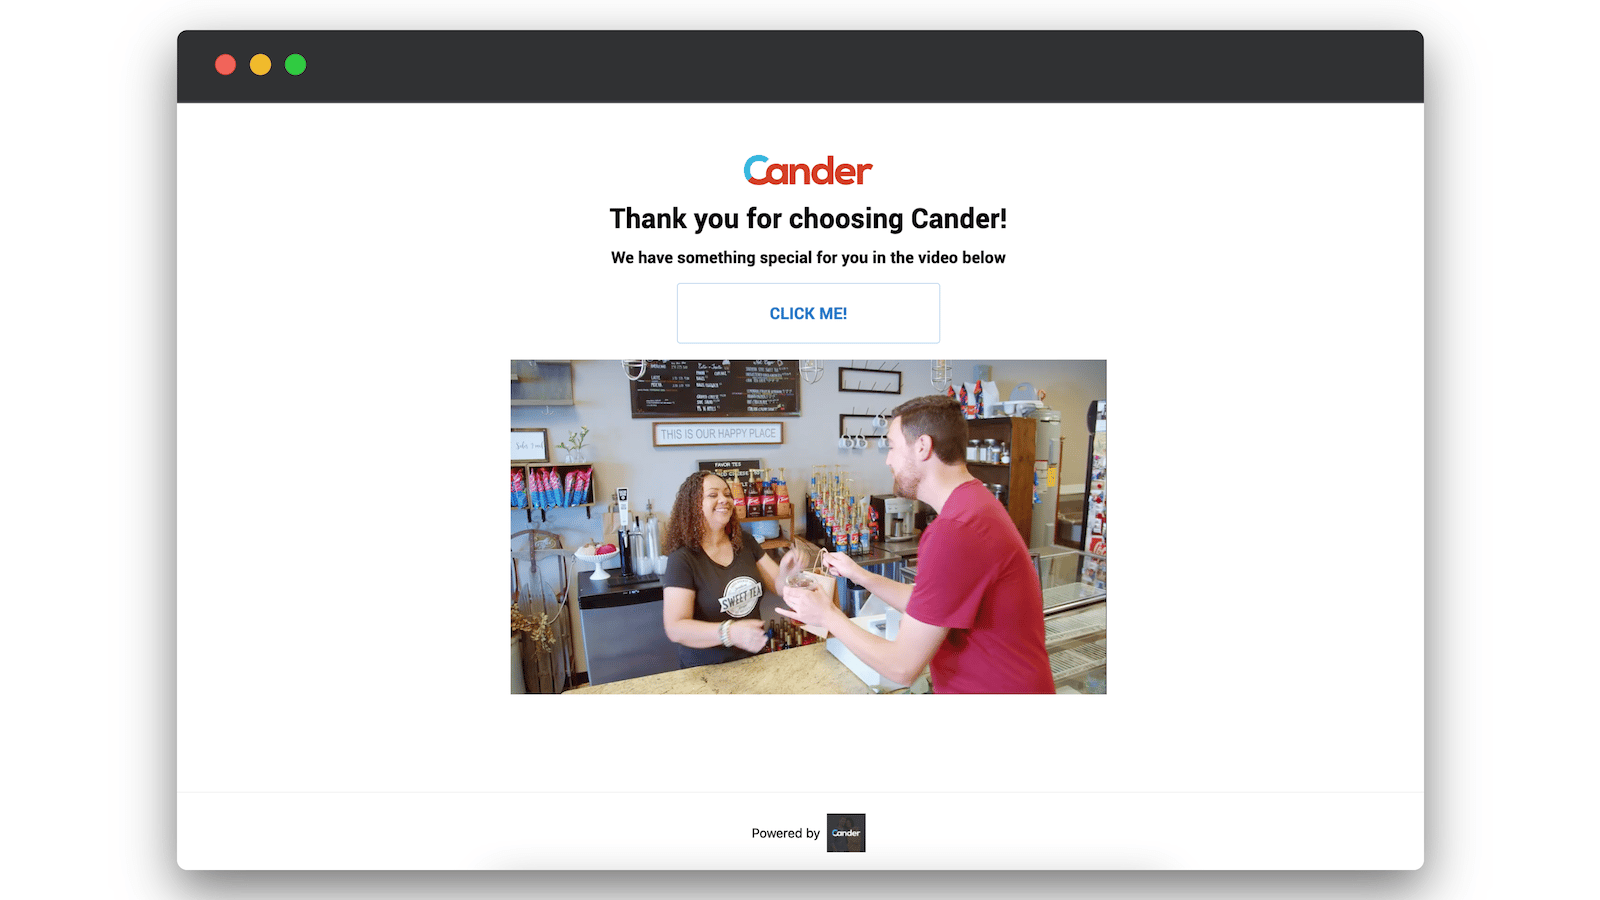 Cander Video Messaging